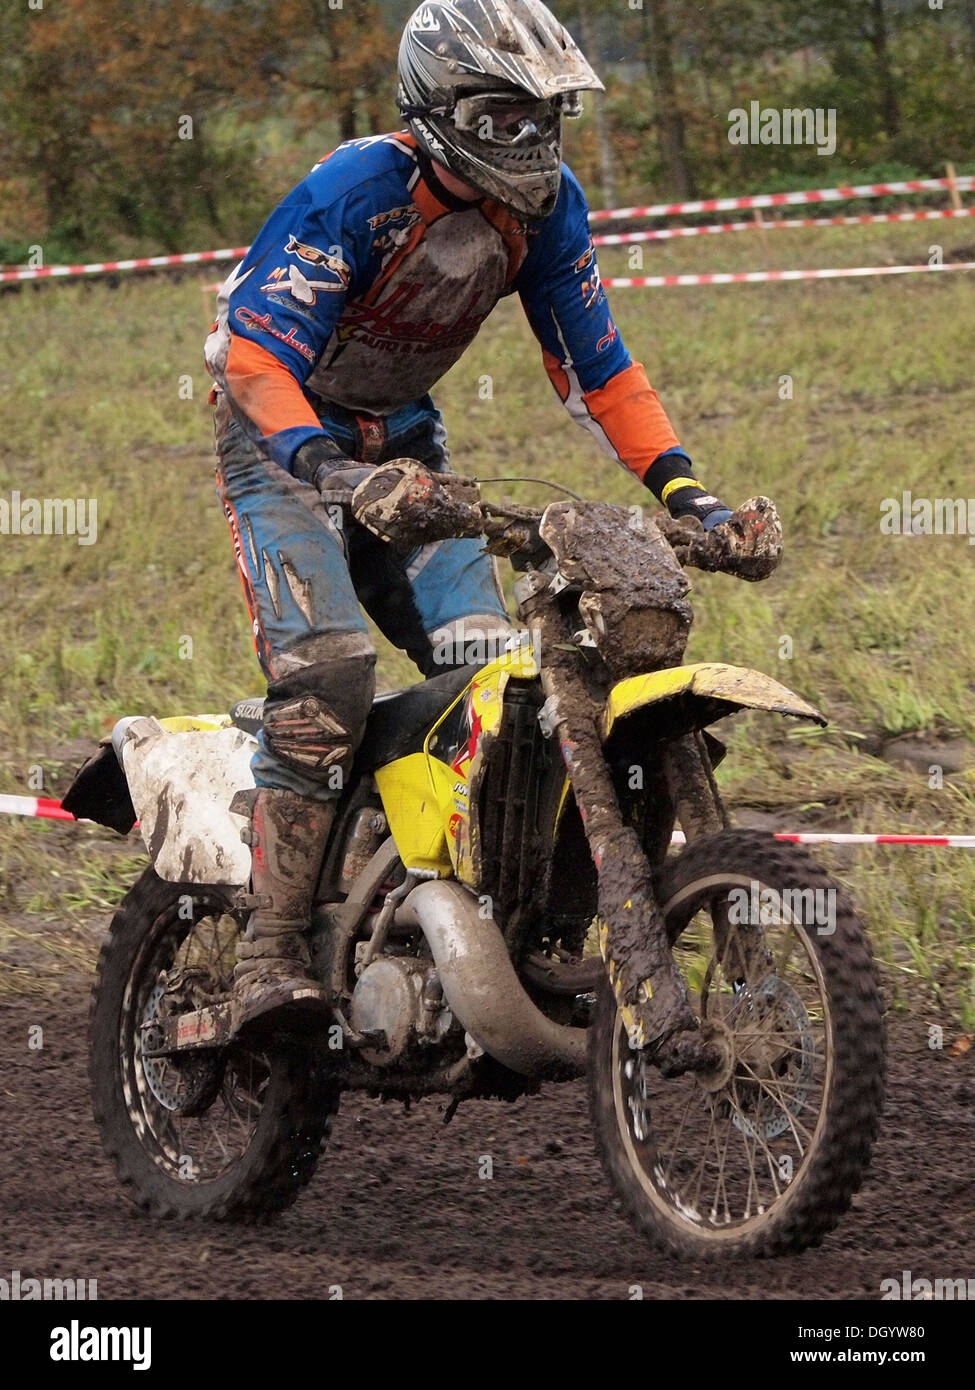 off road motorcyclist standing on footpegs of this two-stroke cross motorcycle Stock Photo